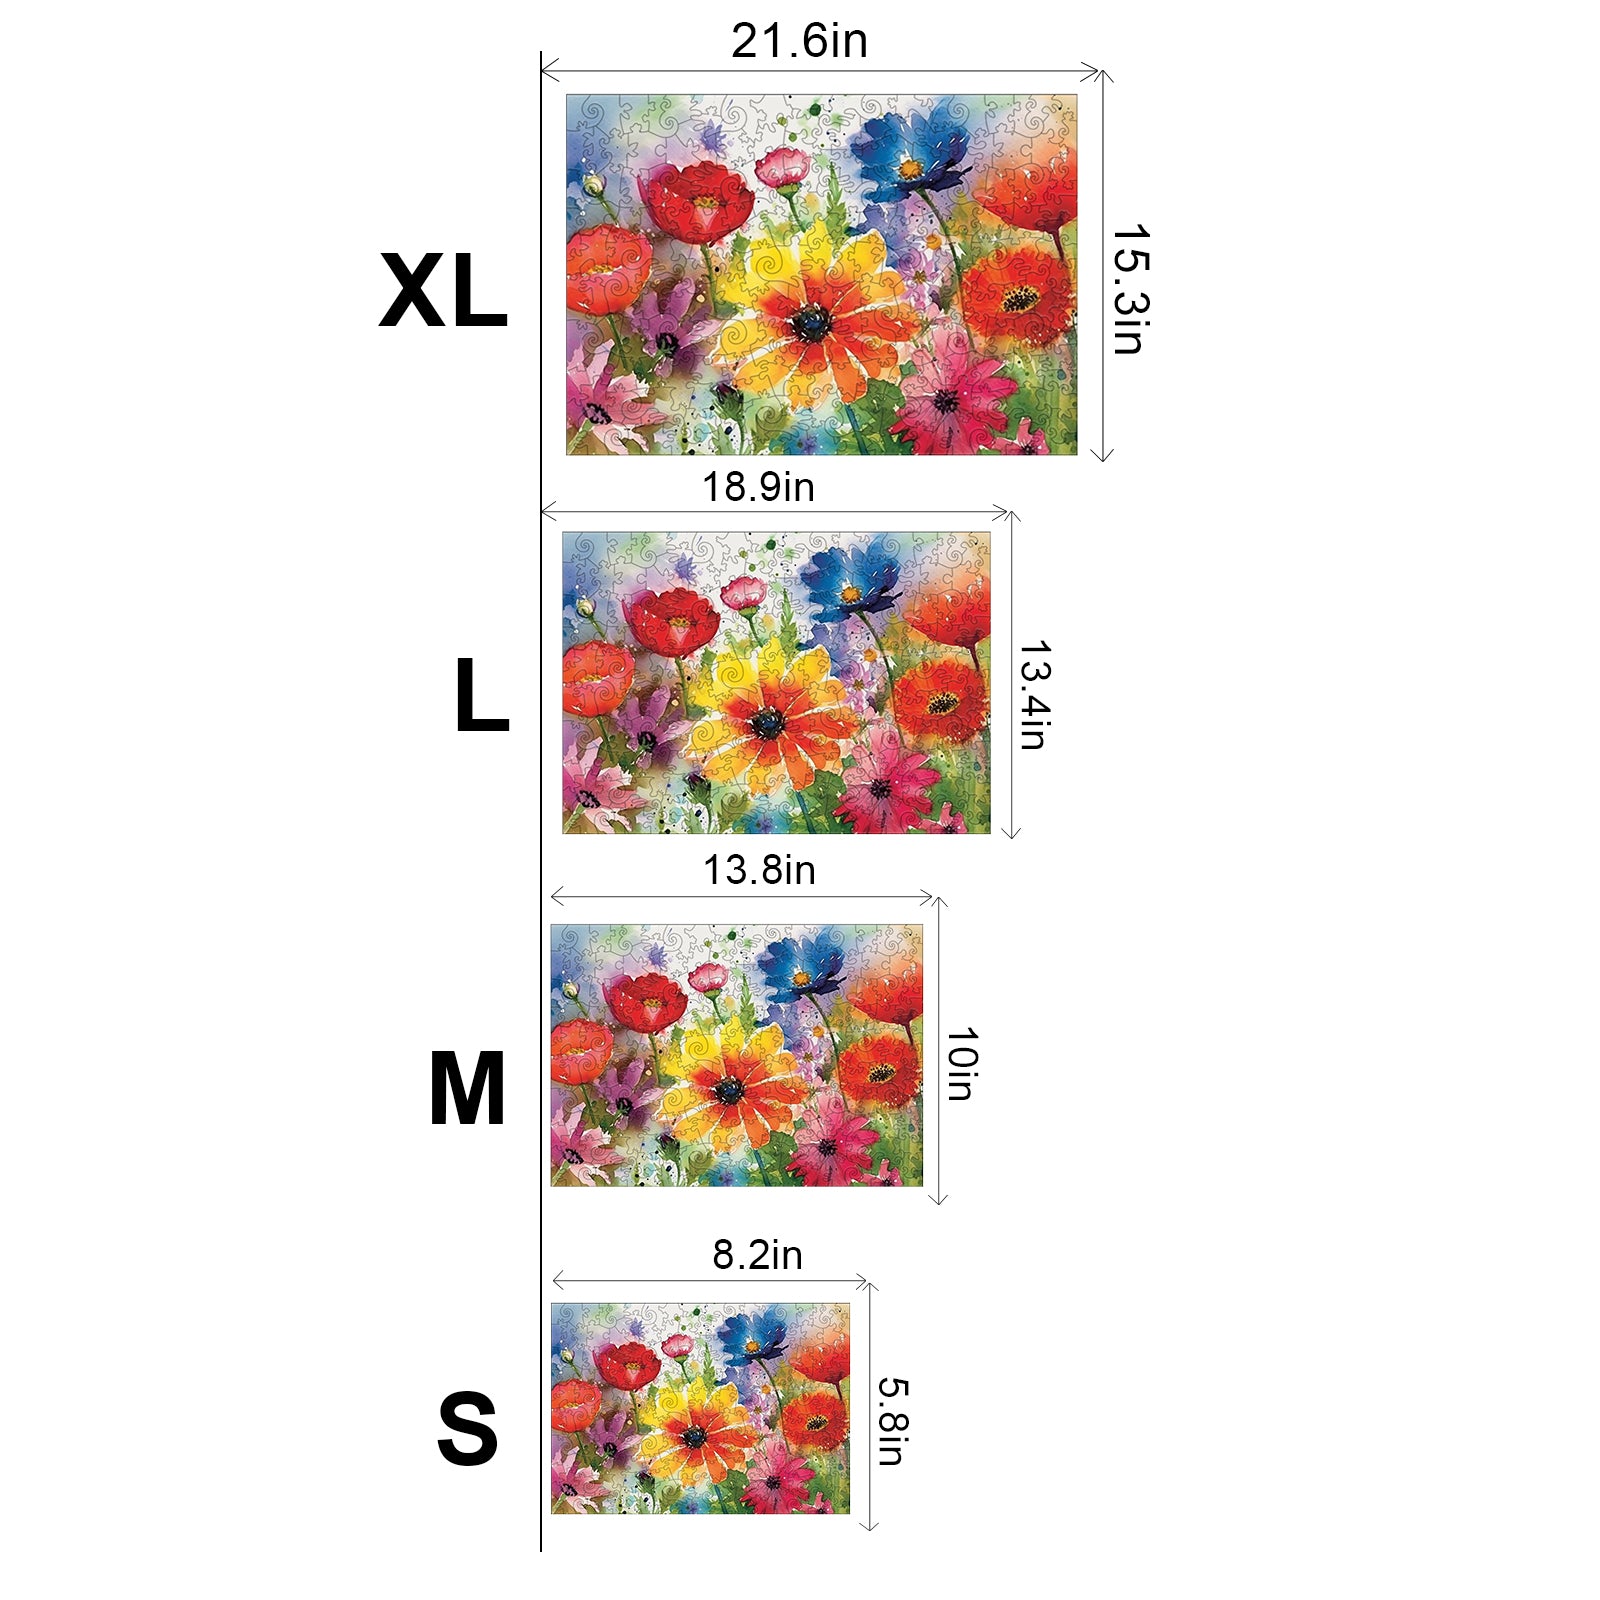 Watercolor Wildflowers Wooden Jigsaw Puzzle